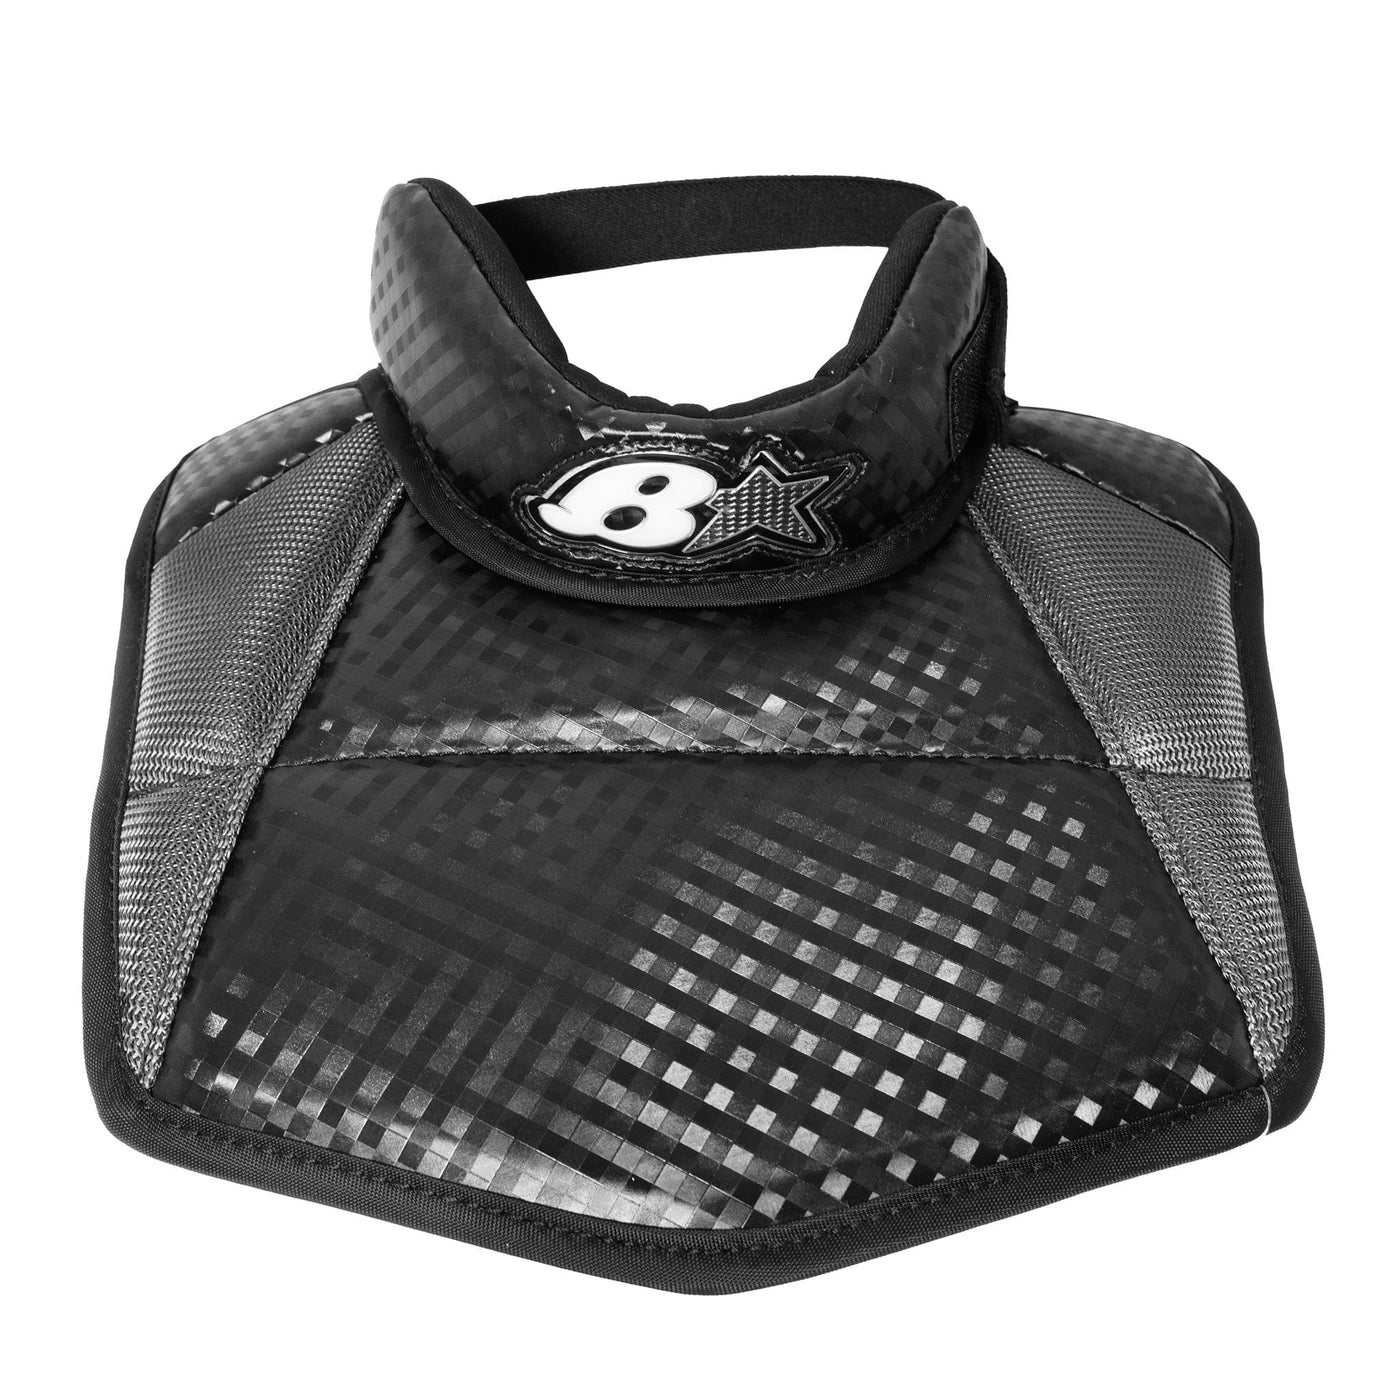 Brian's Pro Senior Goalie Neck Guard - The Hockey Shop Source For Sports